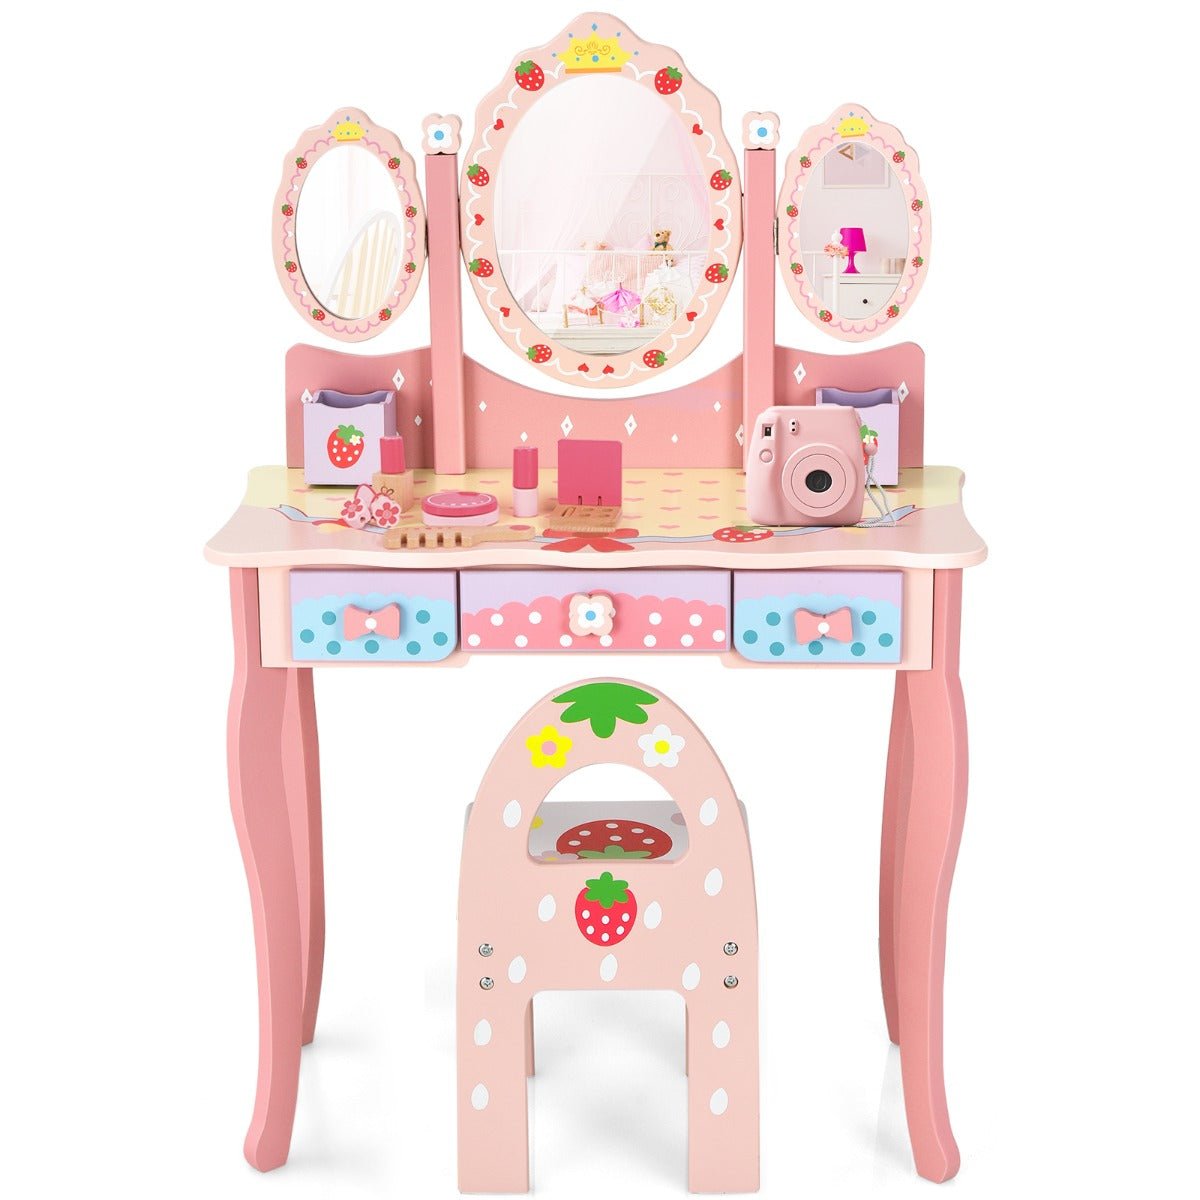 Princess Vanity Table Set with 360° Rotating Mirror for Kids - Pink Glamour